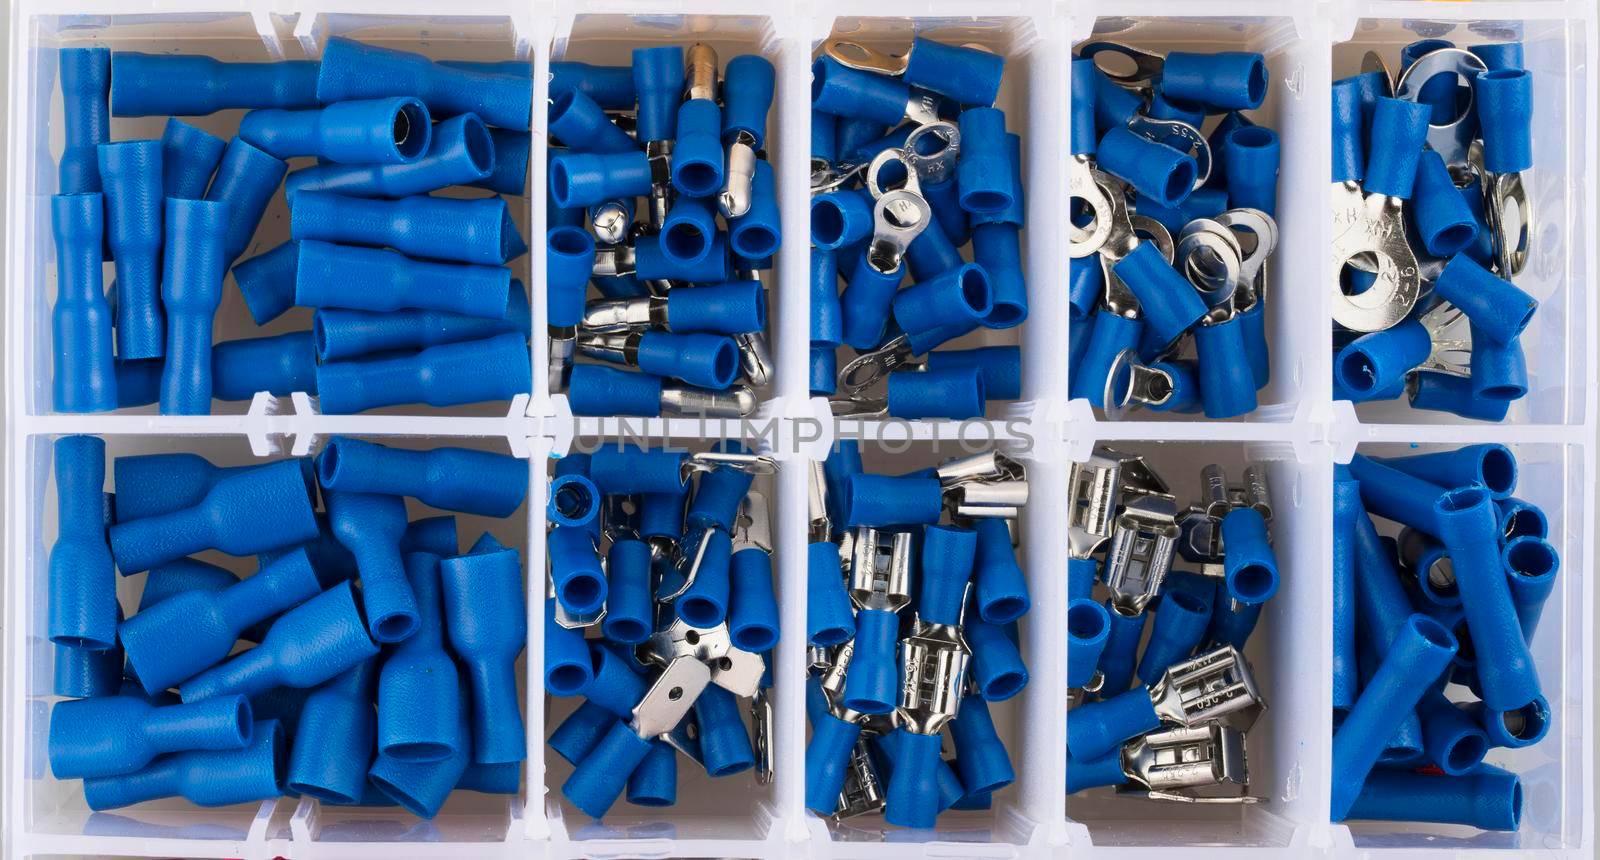 Blue electric terminal connectors organized in plastic contaner.